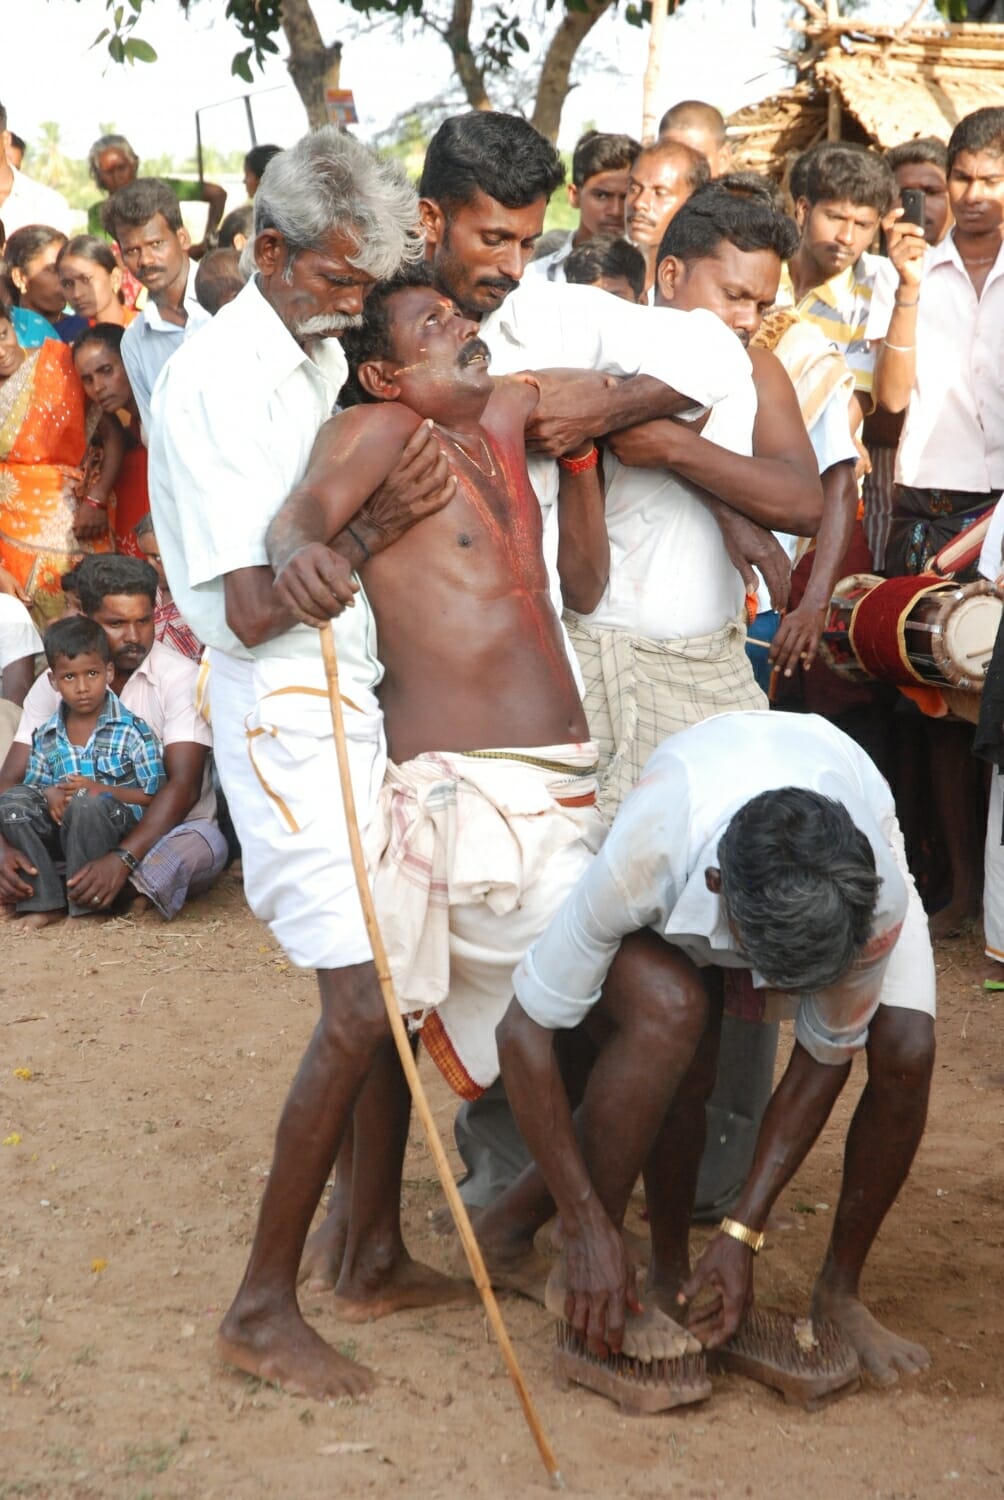 <span style="font-weight:normal;">On the second day at this festival, a <i>sami-attam</i> (dance of the gods) called <i>Elle Sami</i> (Seven Gods) is carried out, where Singaravel incarnates, one by one, seven gods specific to the shrine. This photo was taken right before the dance of the god Sarimuni, who dances on nail-studded sandals with a <i>pujari</i>.</span>